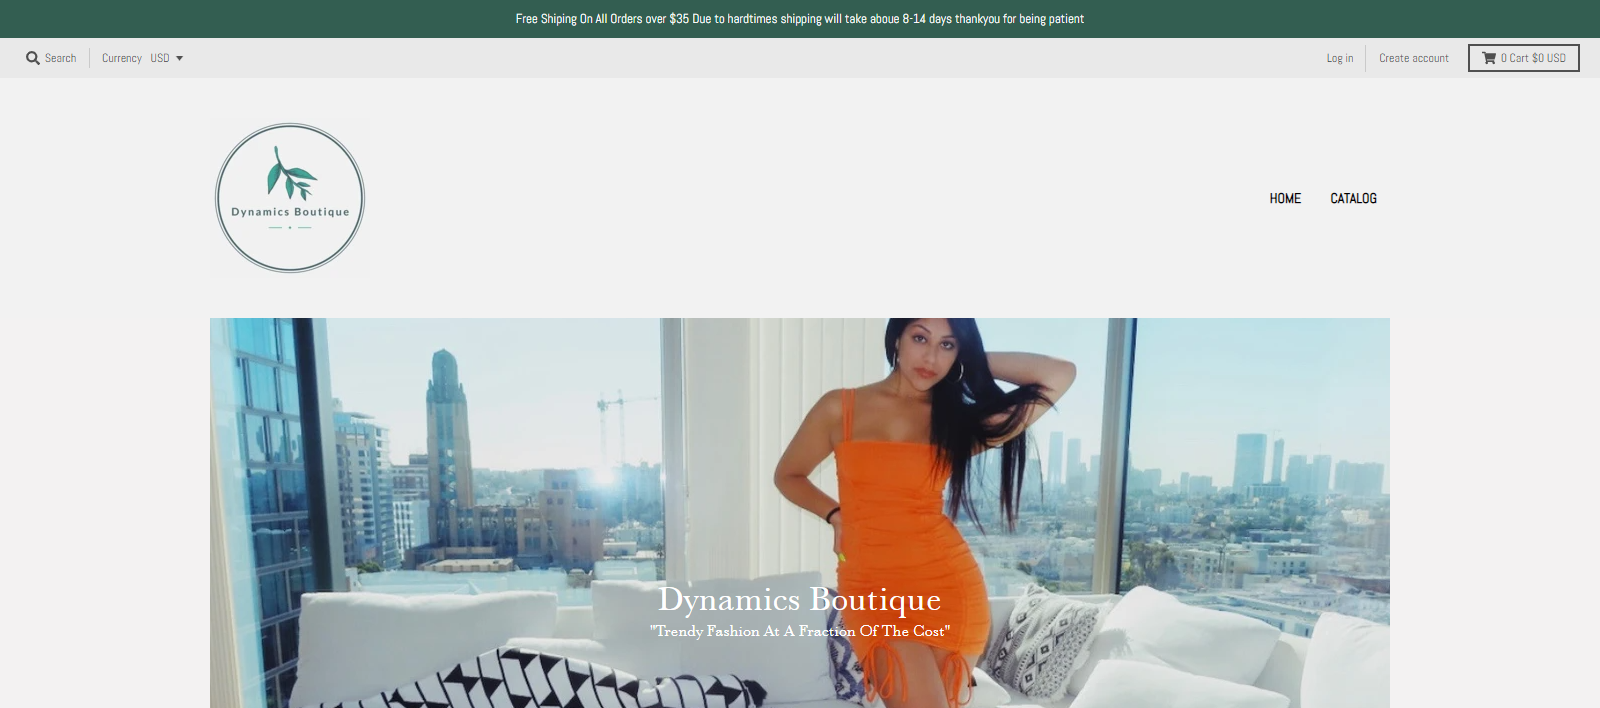 DynamicBoutique Homepage Image